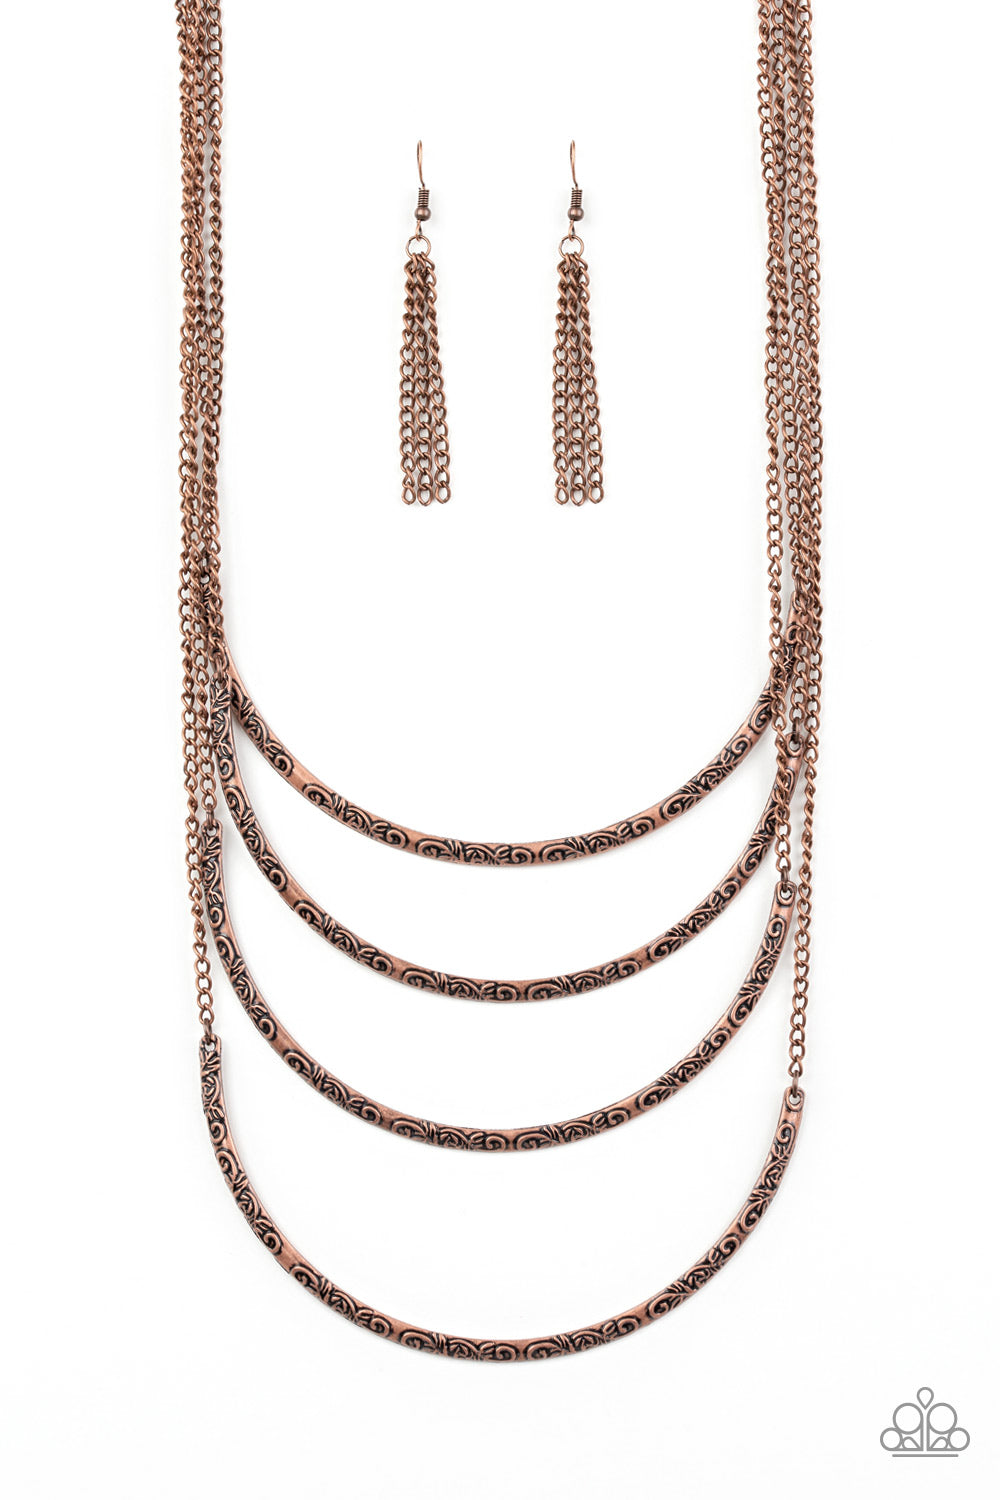 It Will Be Over MOON Copper Paparazzi Necklace Cashmere Pink Jewels - Cashmere Pink Jewels & Accessories, Cashmere Pink Jewels & Accessories - Paparazzi